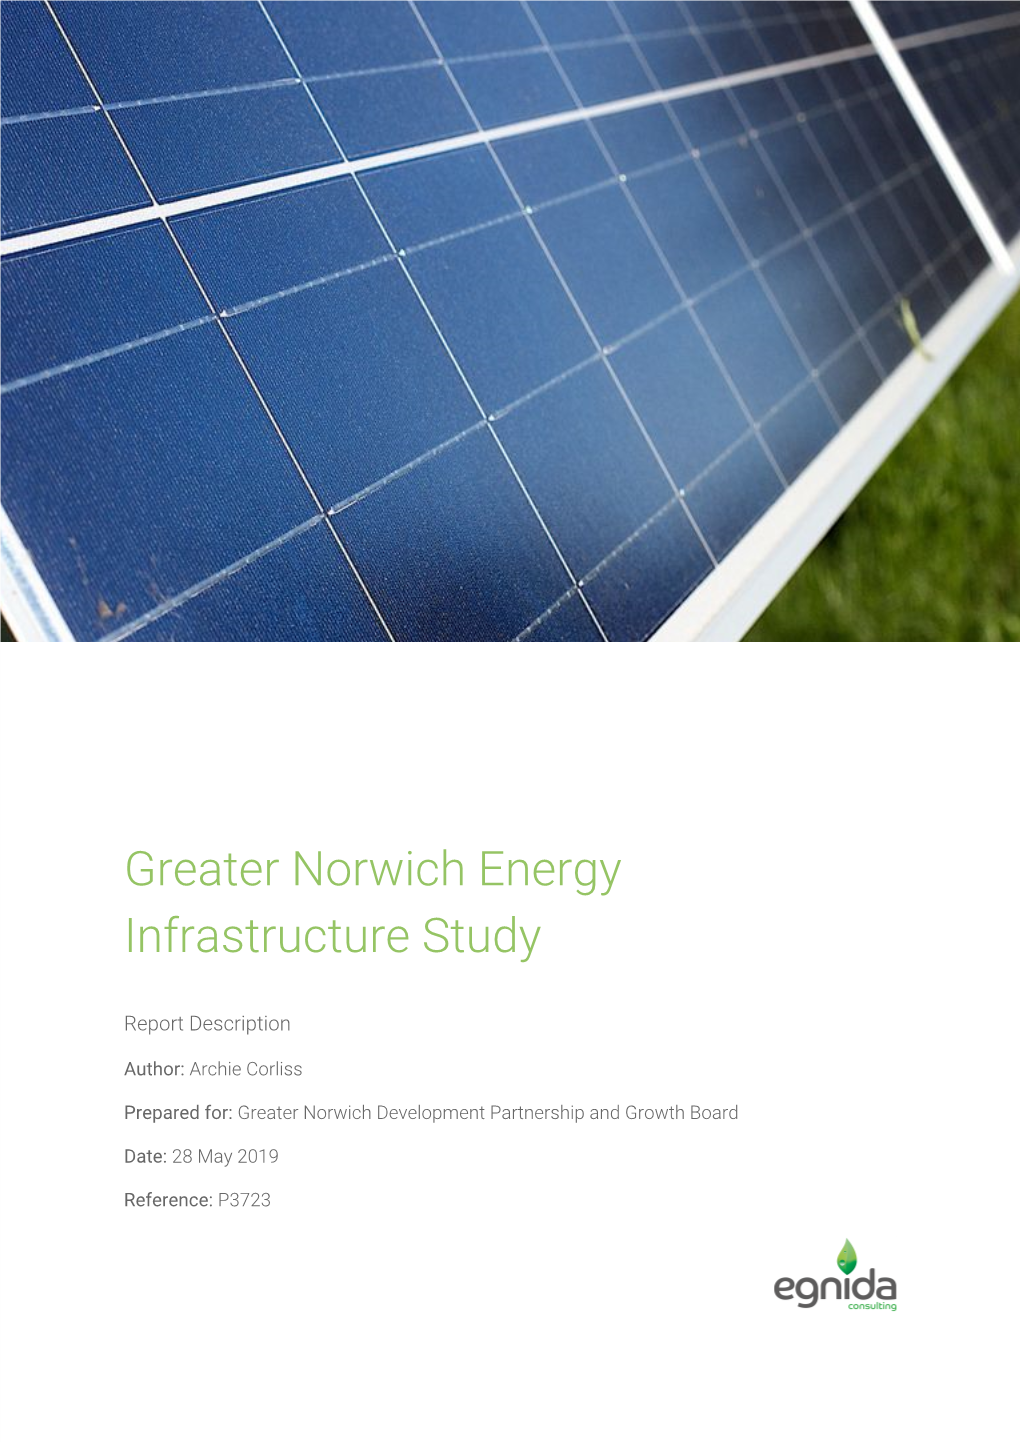 Greater Norwich Energy Infrastructure Study